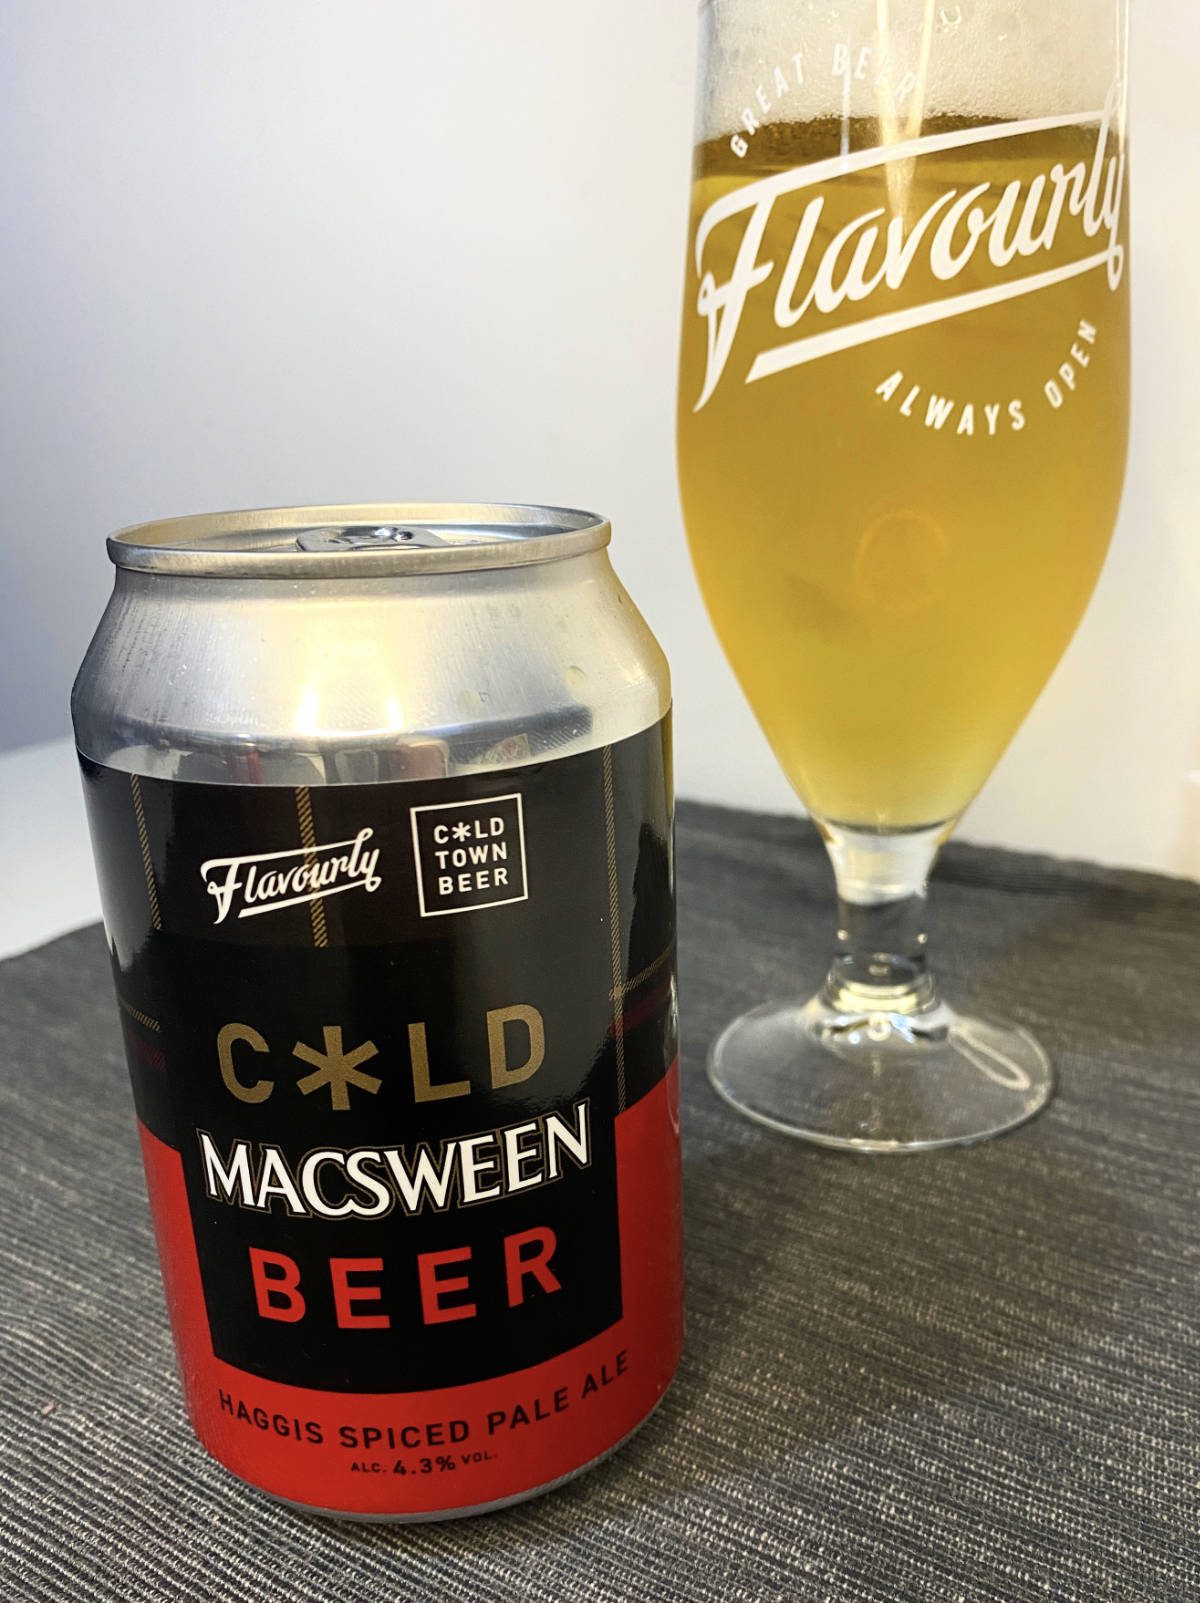 Flavourly Partner With Macsween And Cold Town To Launch The First Haggis Craft Beer In Celebration Of Burns Night